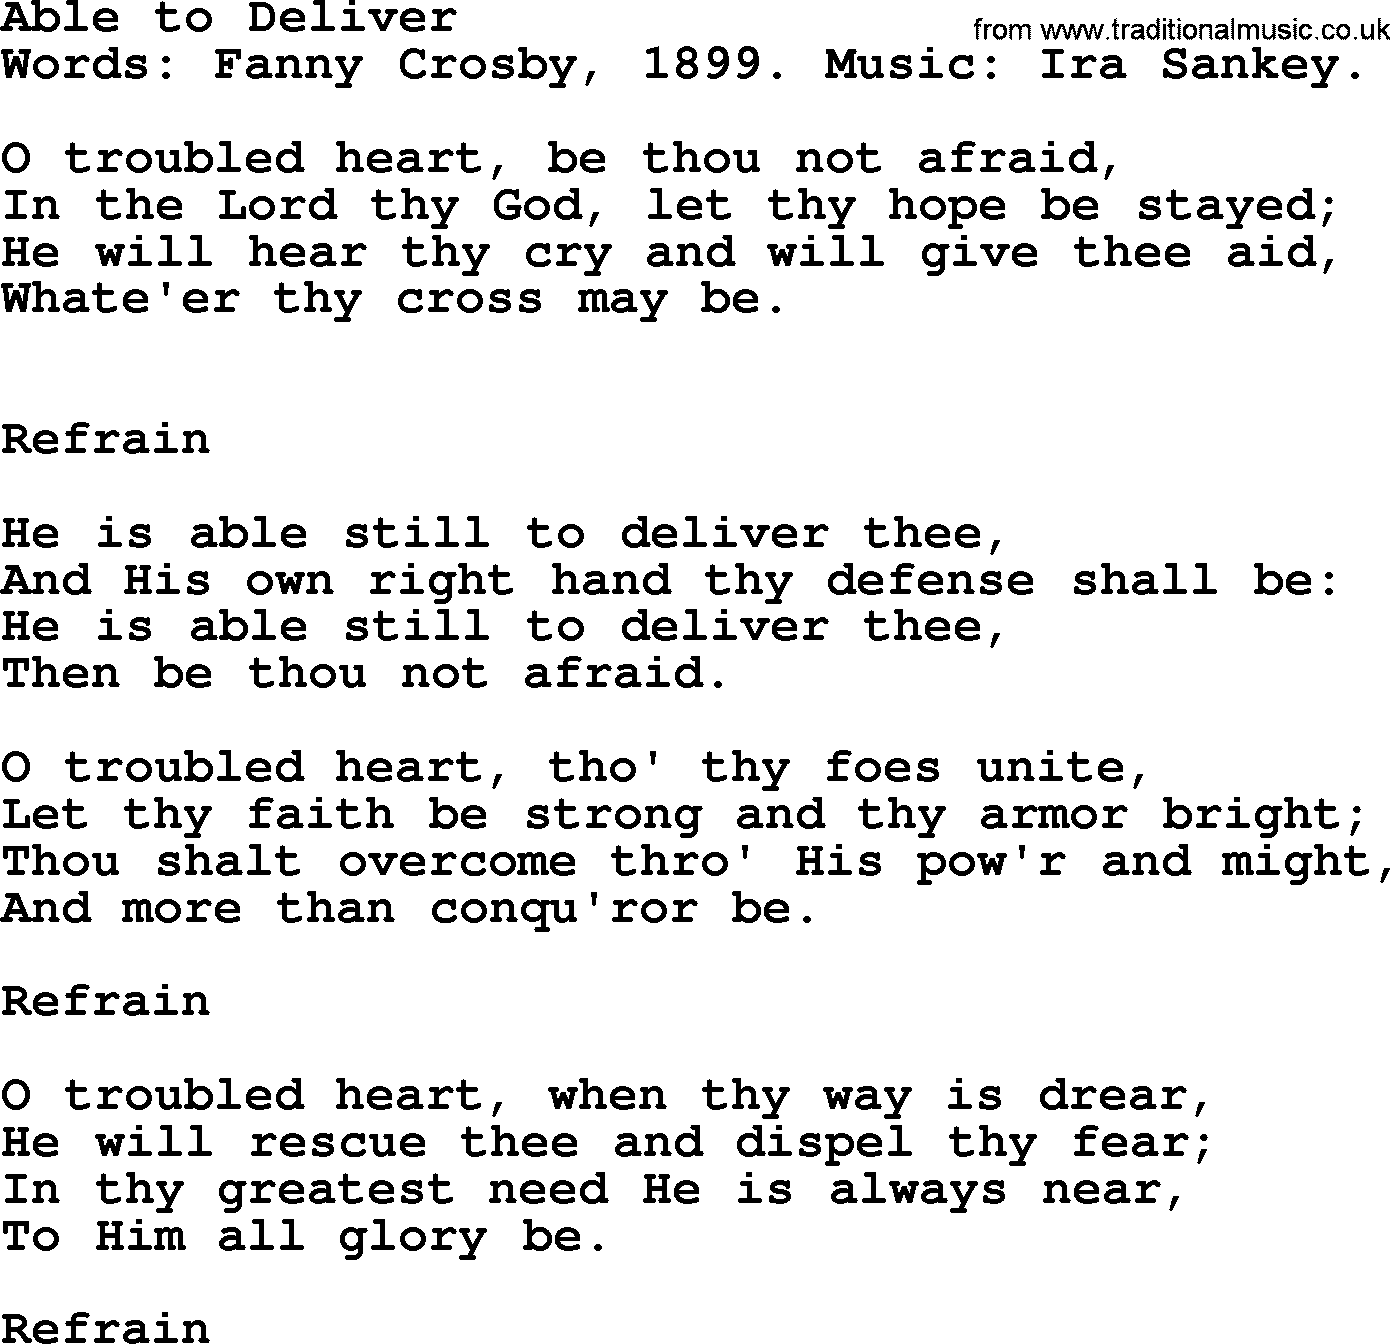 Fanny Crosby song: Able To Deliver, lyrics